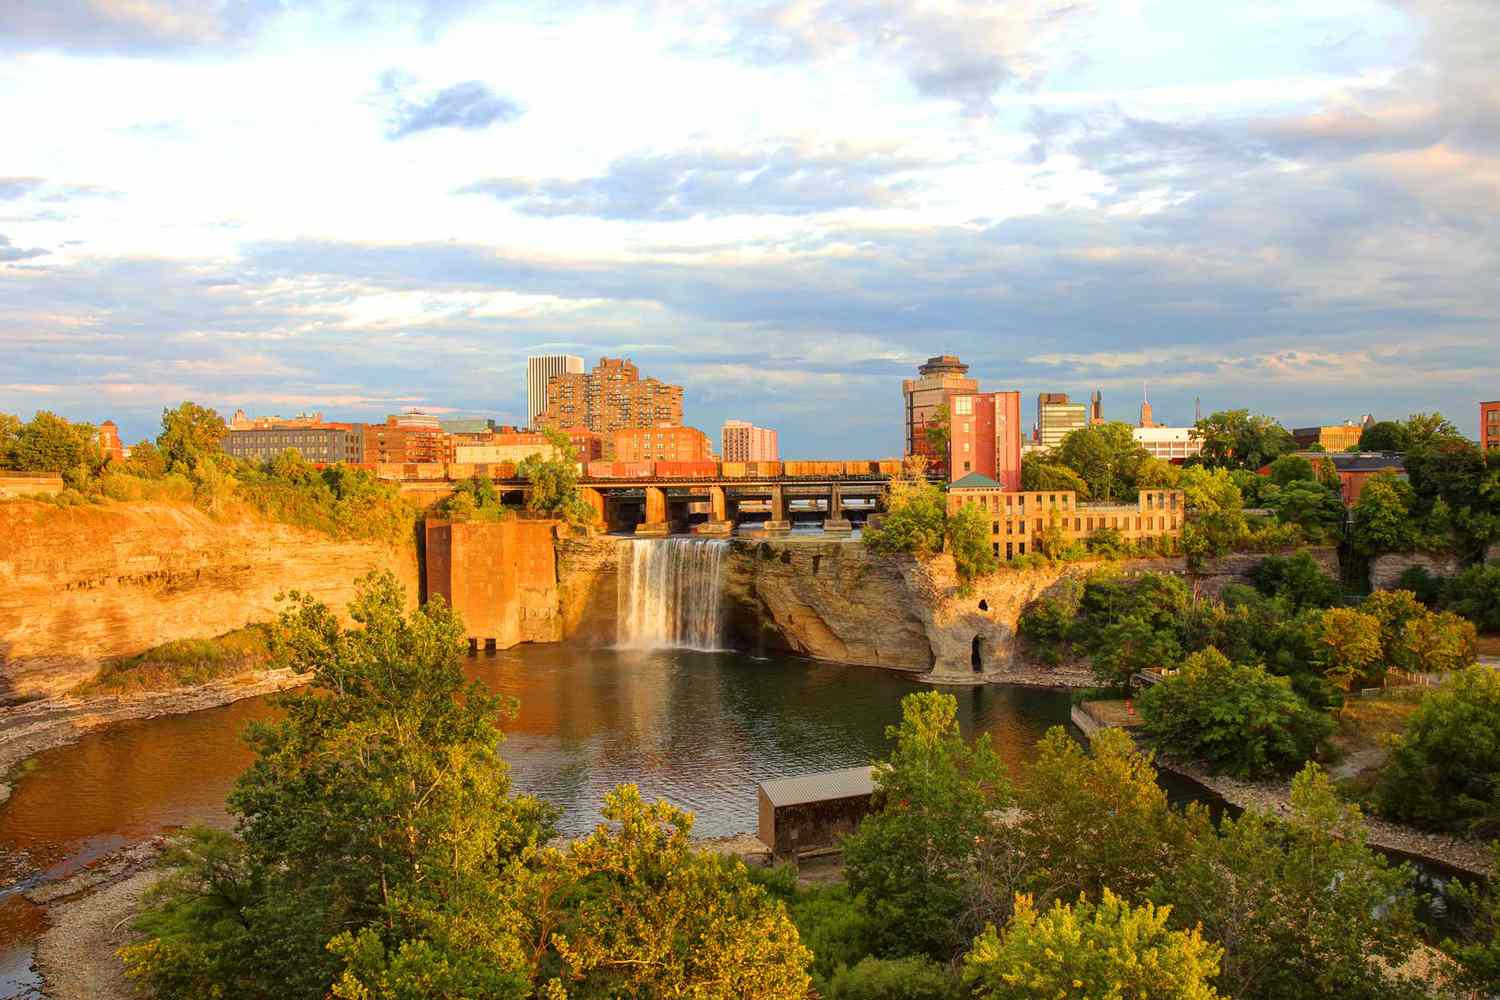 12 Facts About Urban Development In Rochester, New York - Facts.net